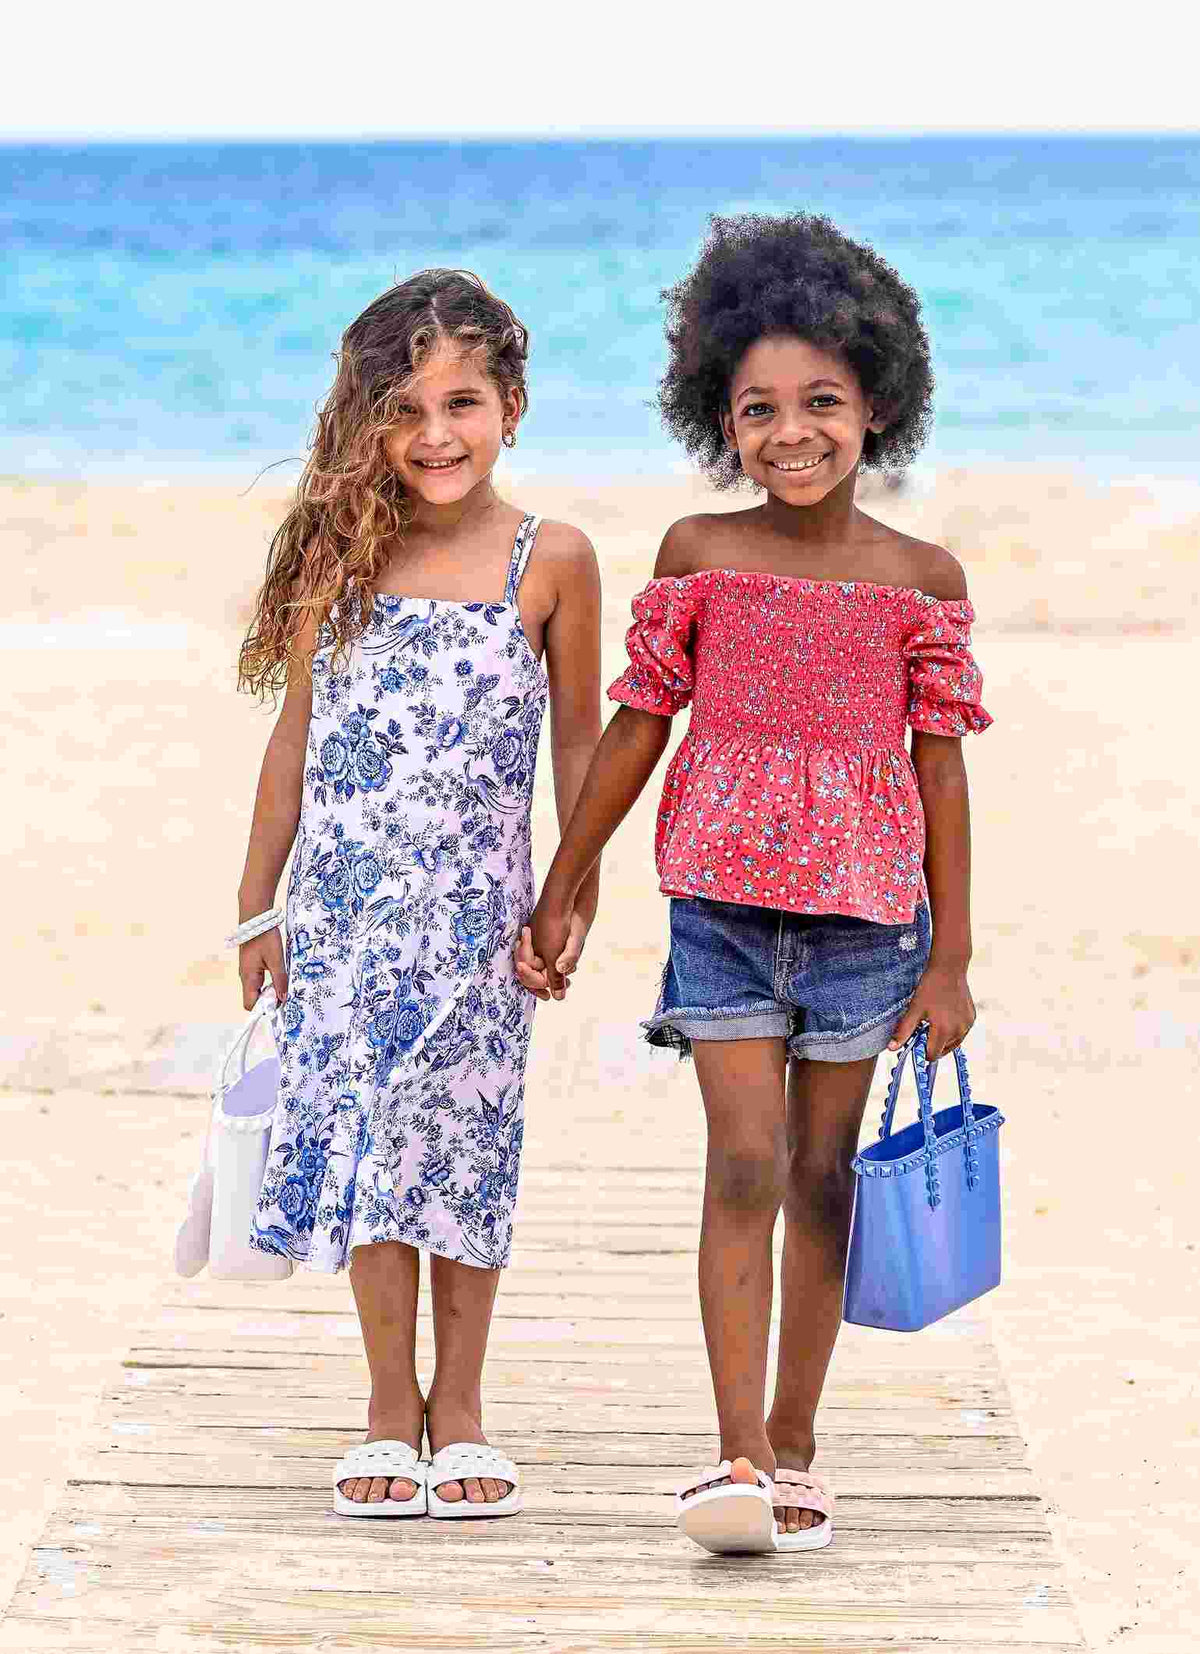 Beach jelly bags for your kids which are waterproof made in italy.